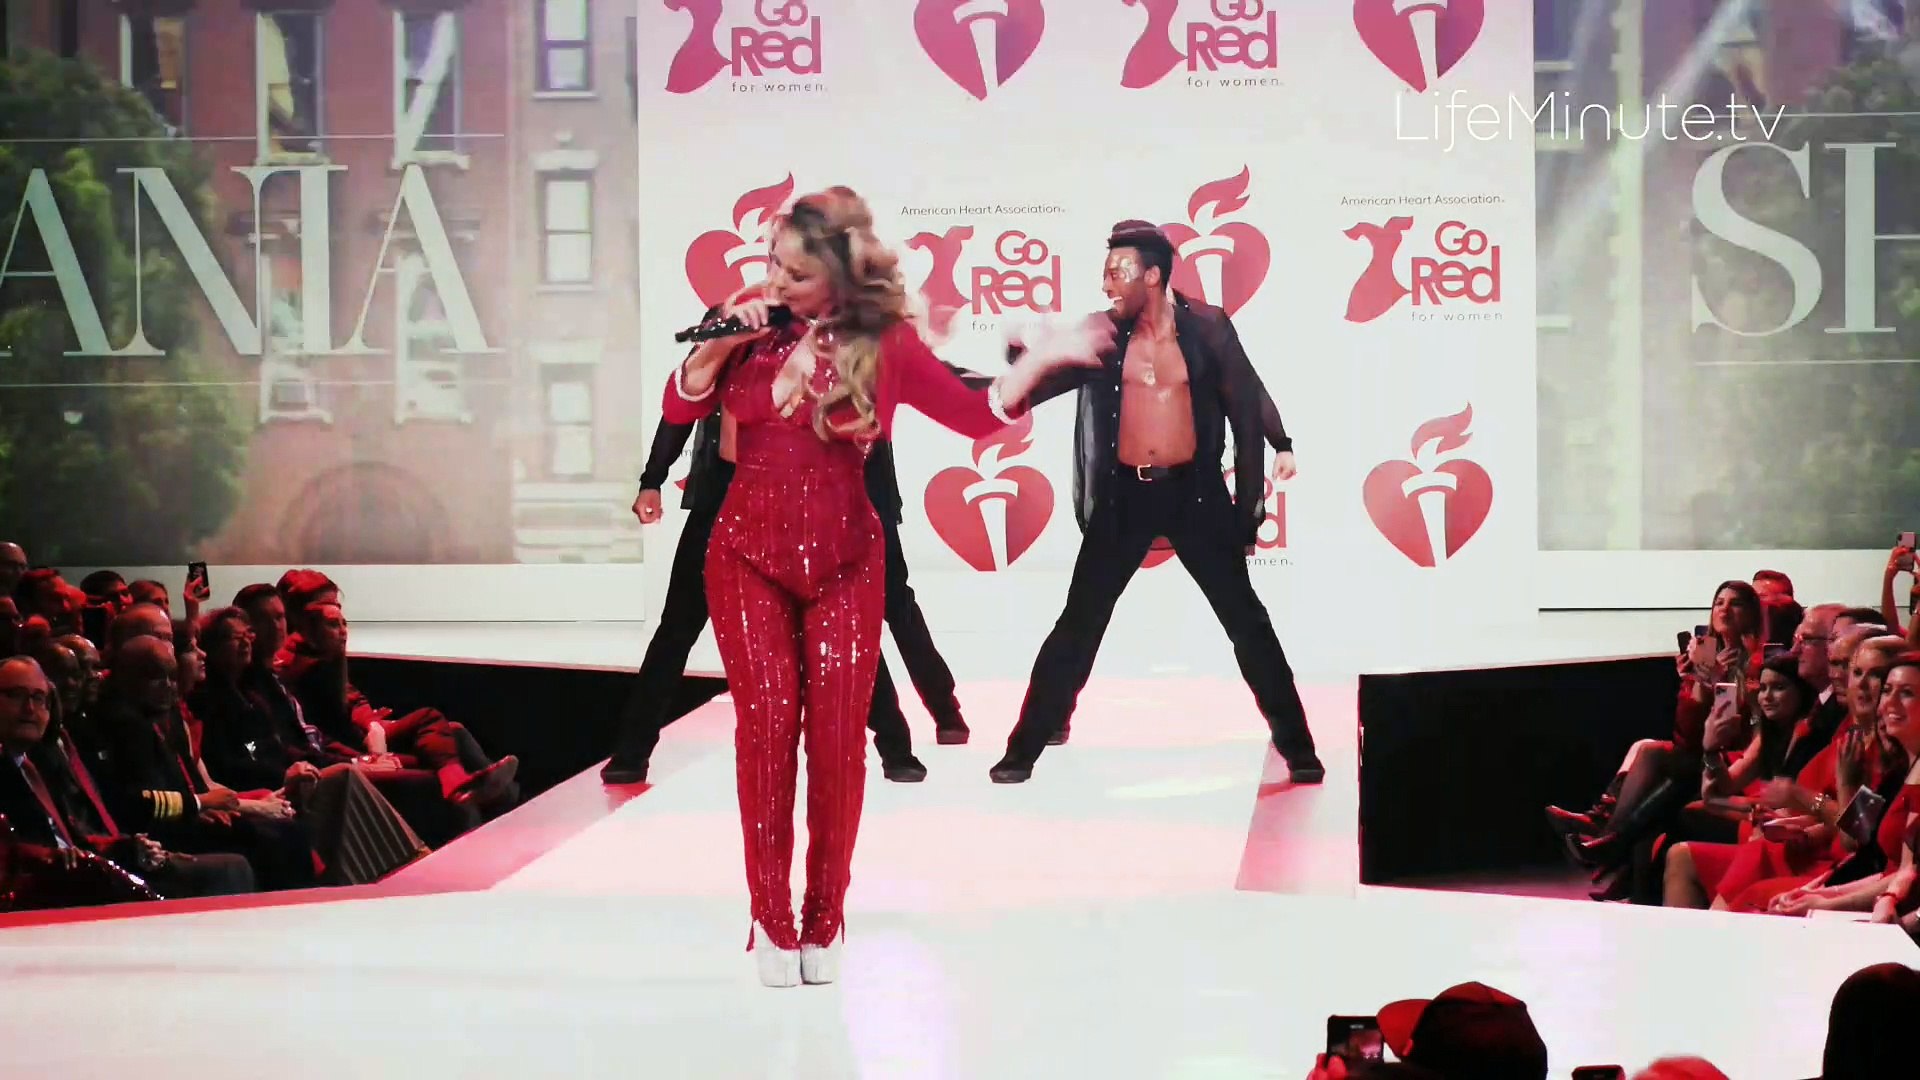 Meghan Trainor, Shania Twain & More At Red Dress Collection 2020